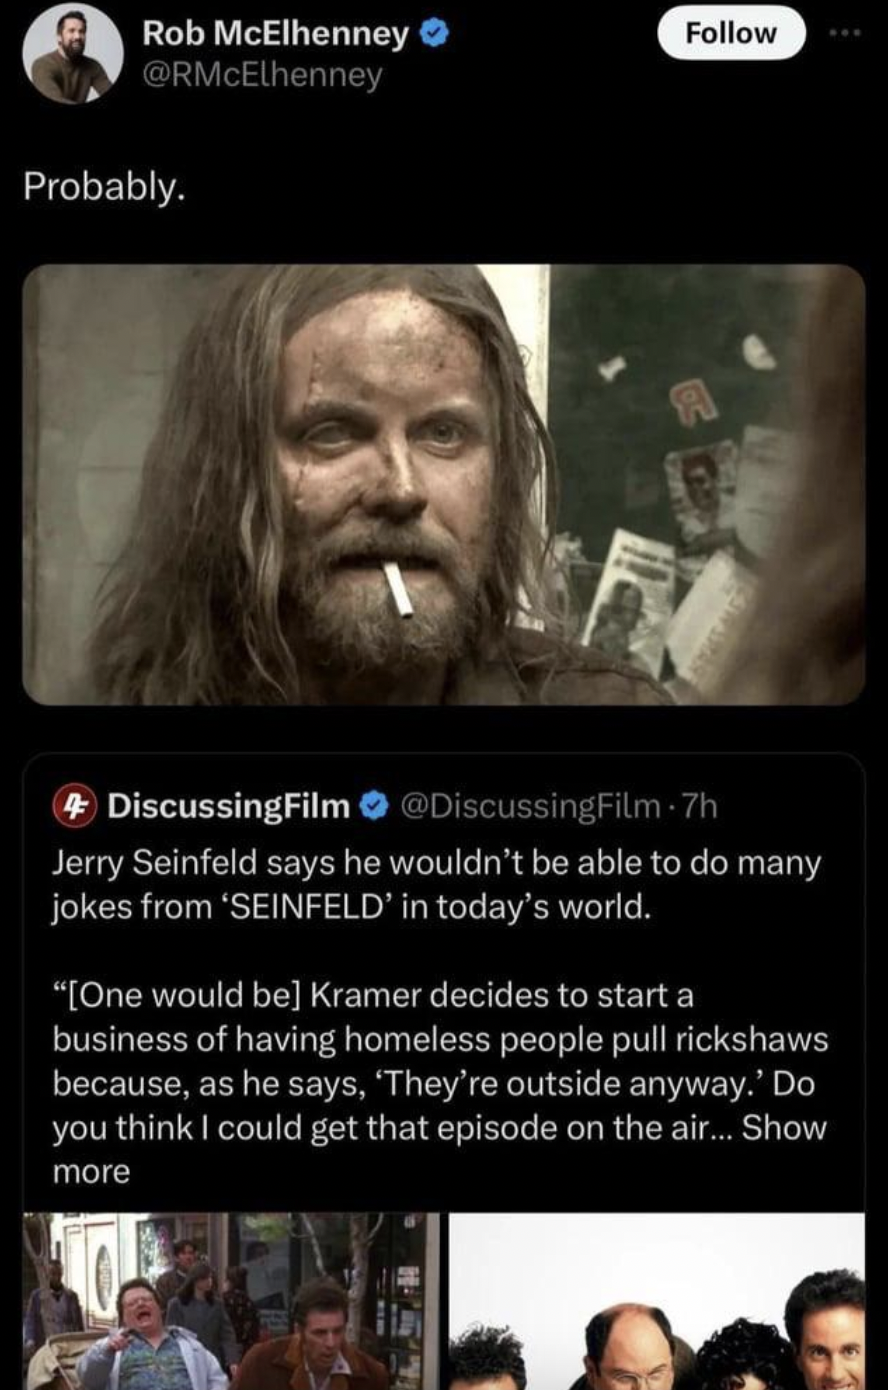 screenshot - Rob McElhenney ... Probably. DiscussingFilm Jerry Seinfeld says he wouldn't be able to do many jokes from 'Seinfeld' in today's world. "One would be Kramer decides to start a business of having homeless people pull rickshaws because, as he sa